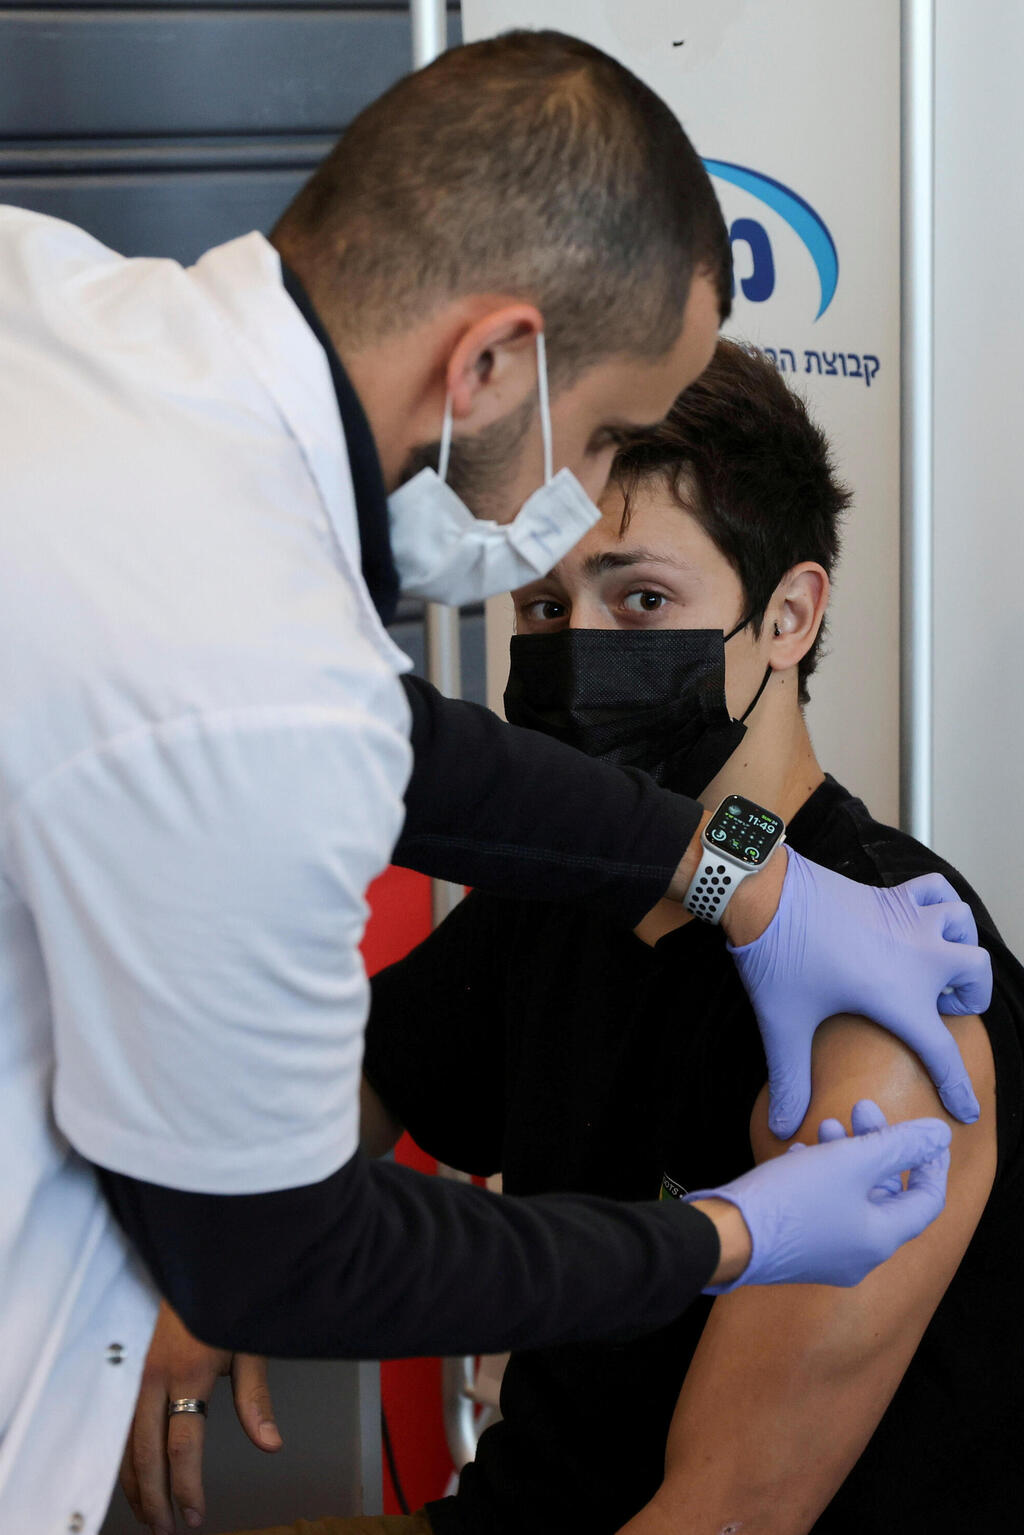 A teenager receives a vaccination against the coronavirus in Tel Aviv, Israel 